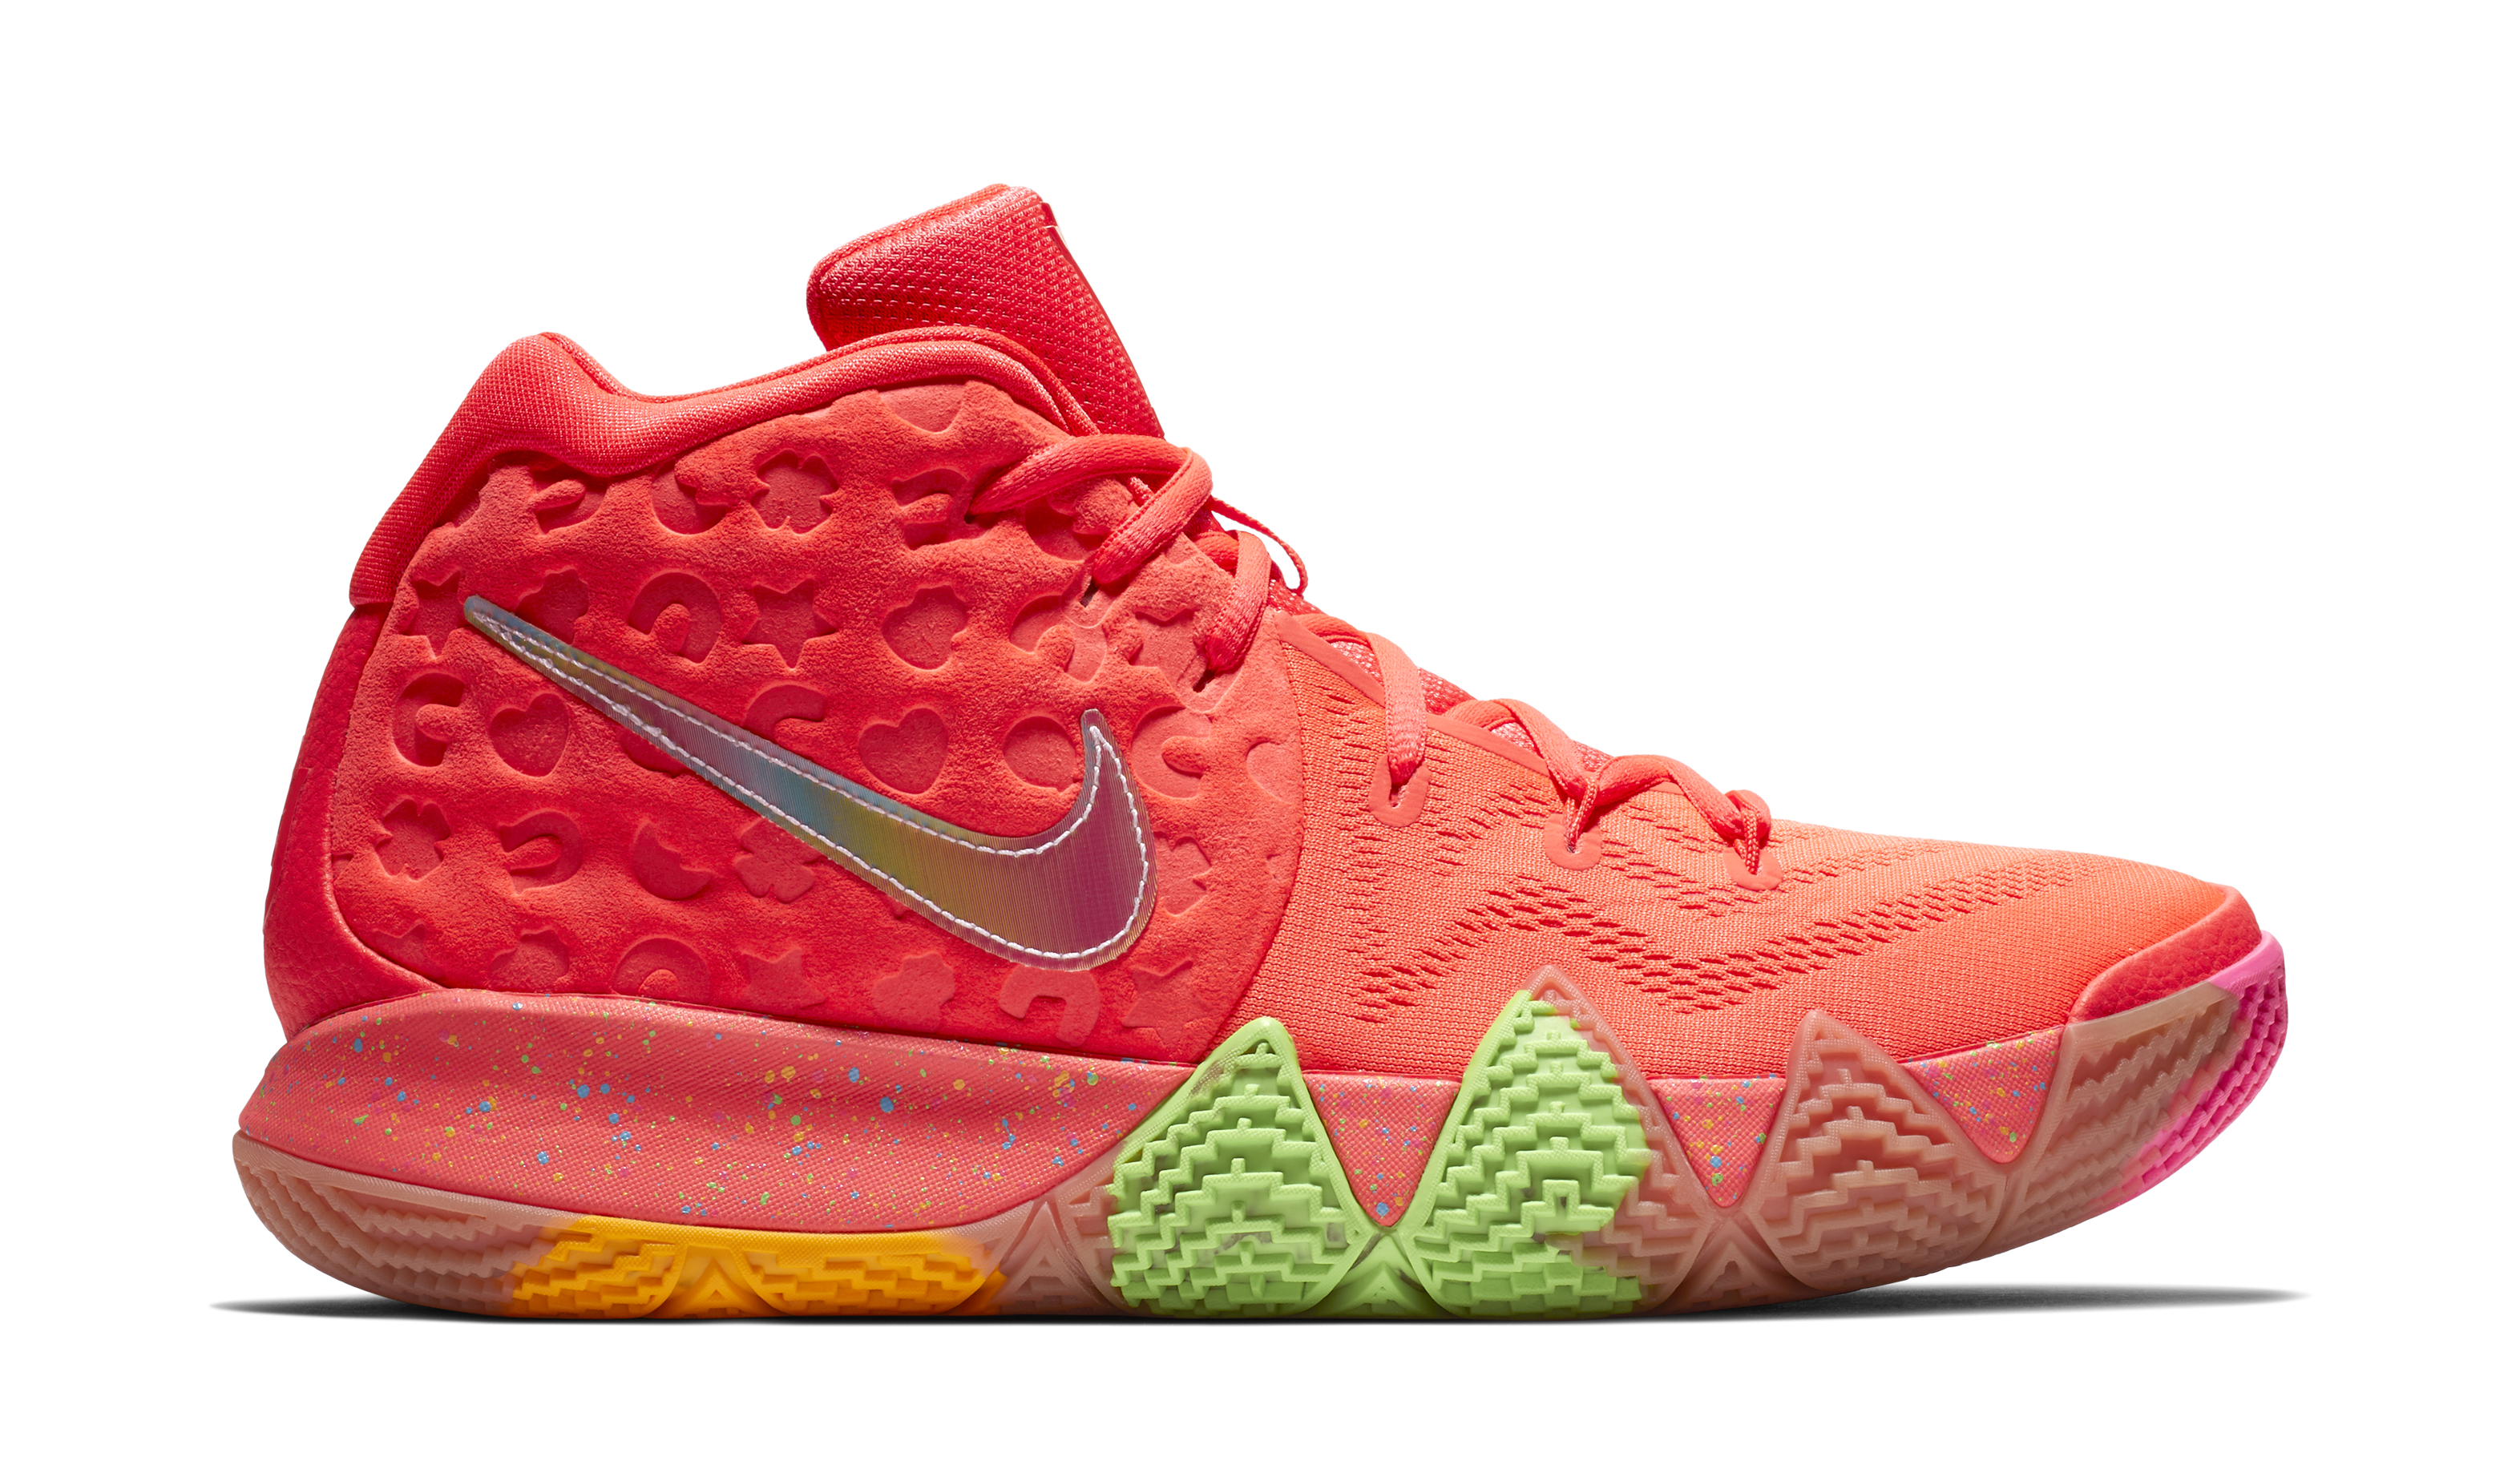 Nike Kyrie 4 &#x27;Lucky Charms&#x27; BV0428 600 (Lateral)